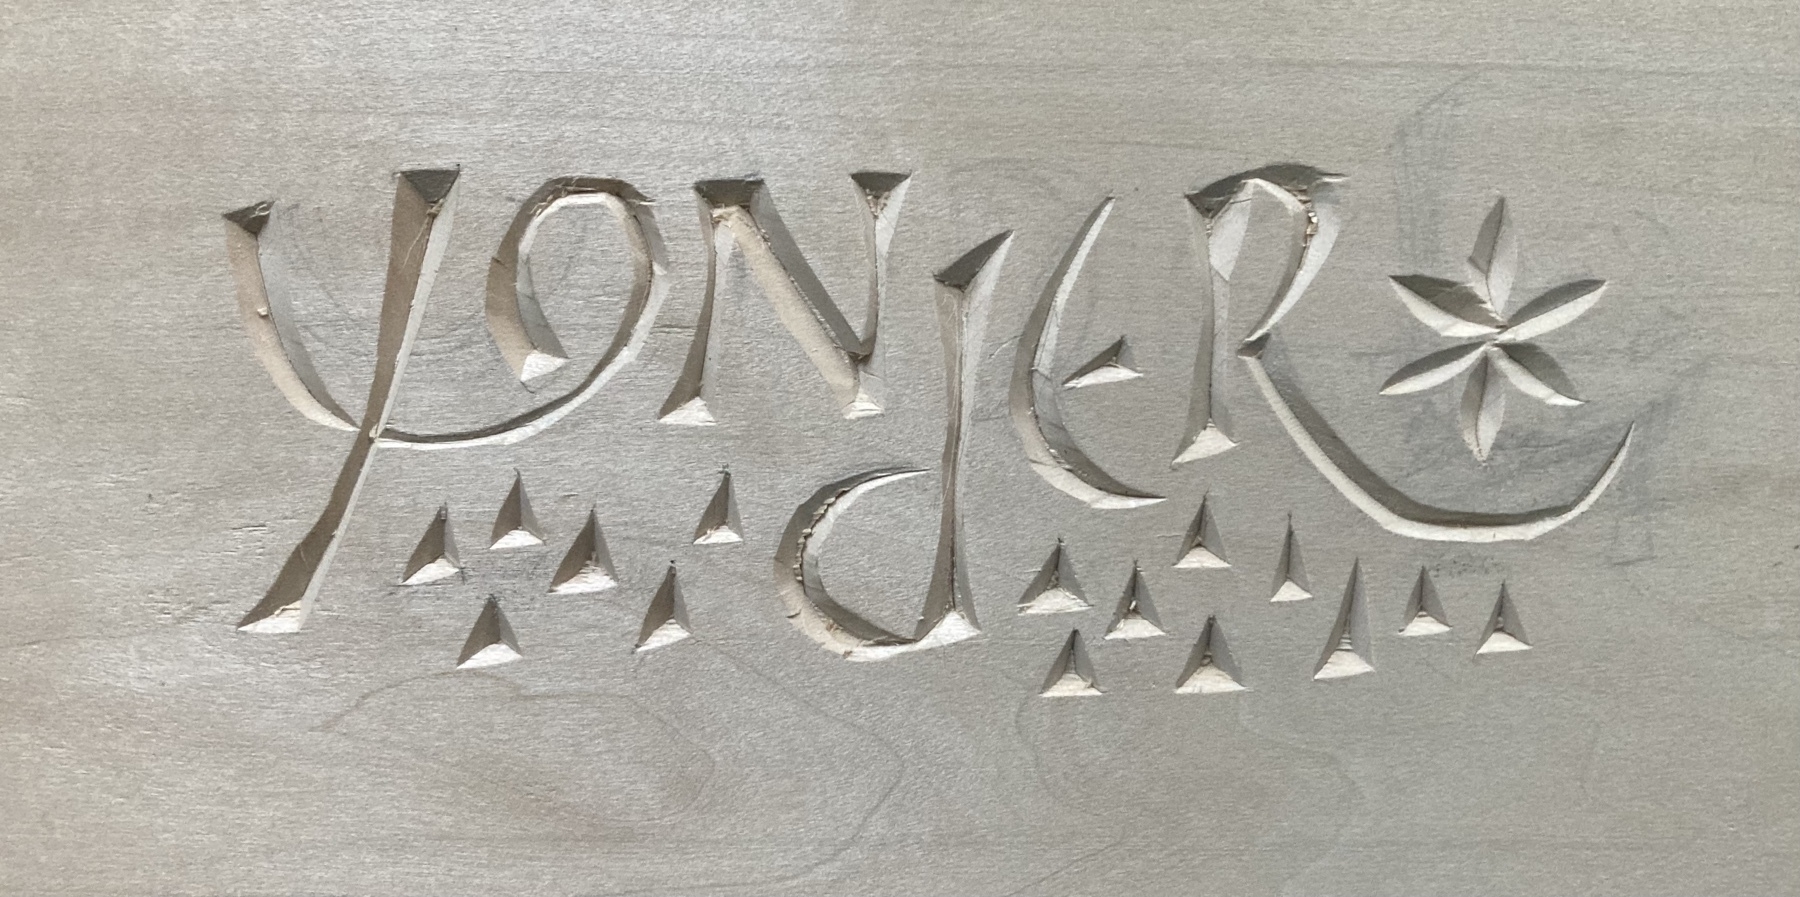 chip carving of the word yonder with triangles to represent mountains